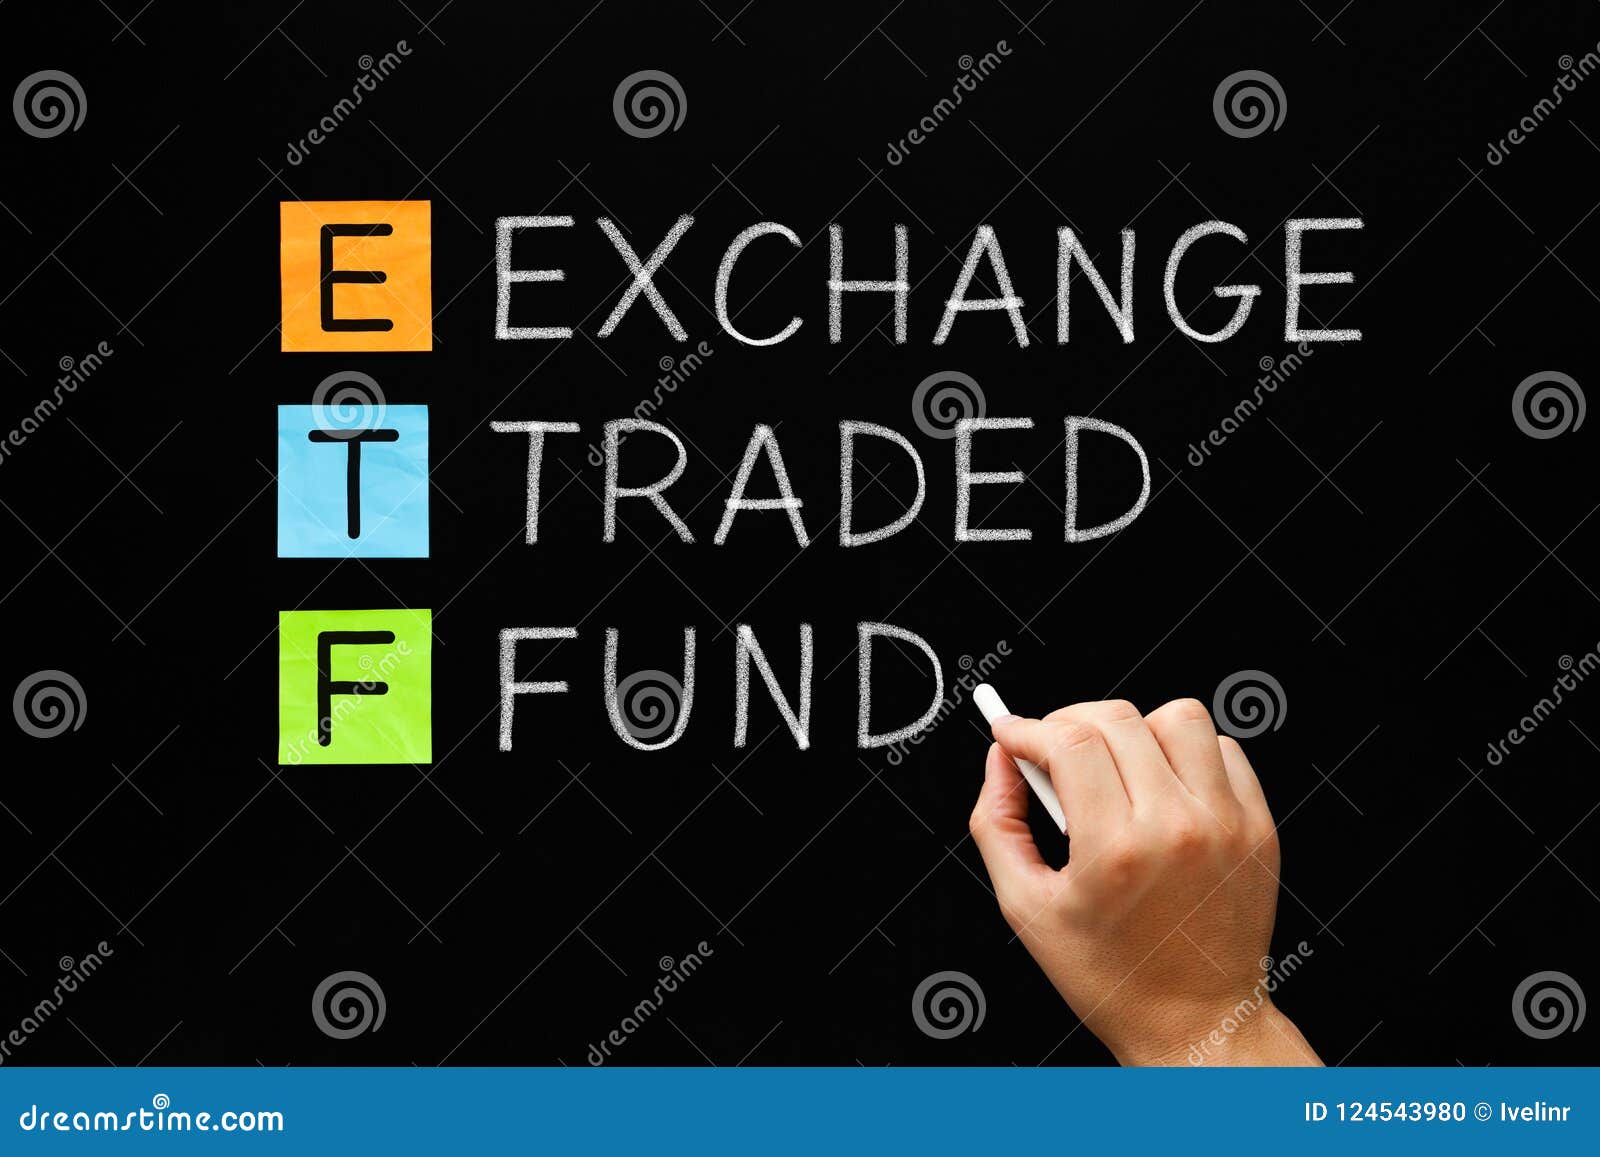 etf - exchange traded fund concept